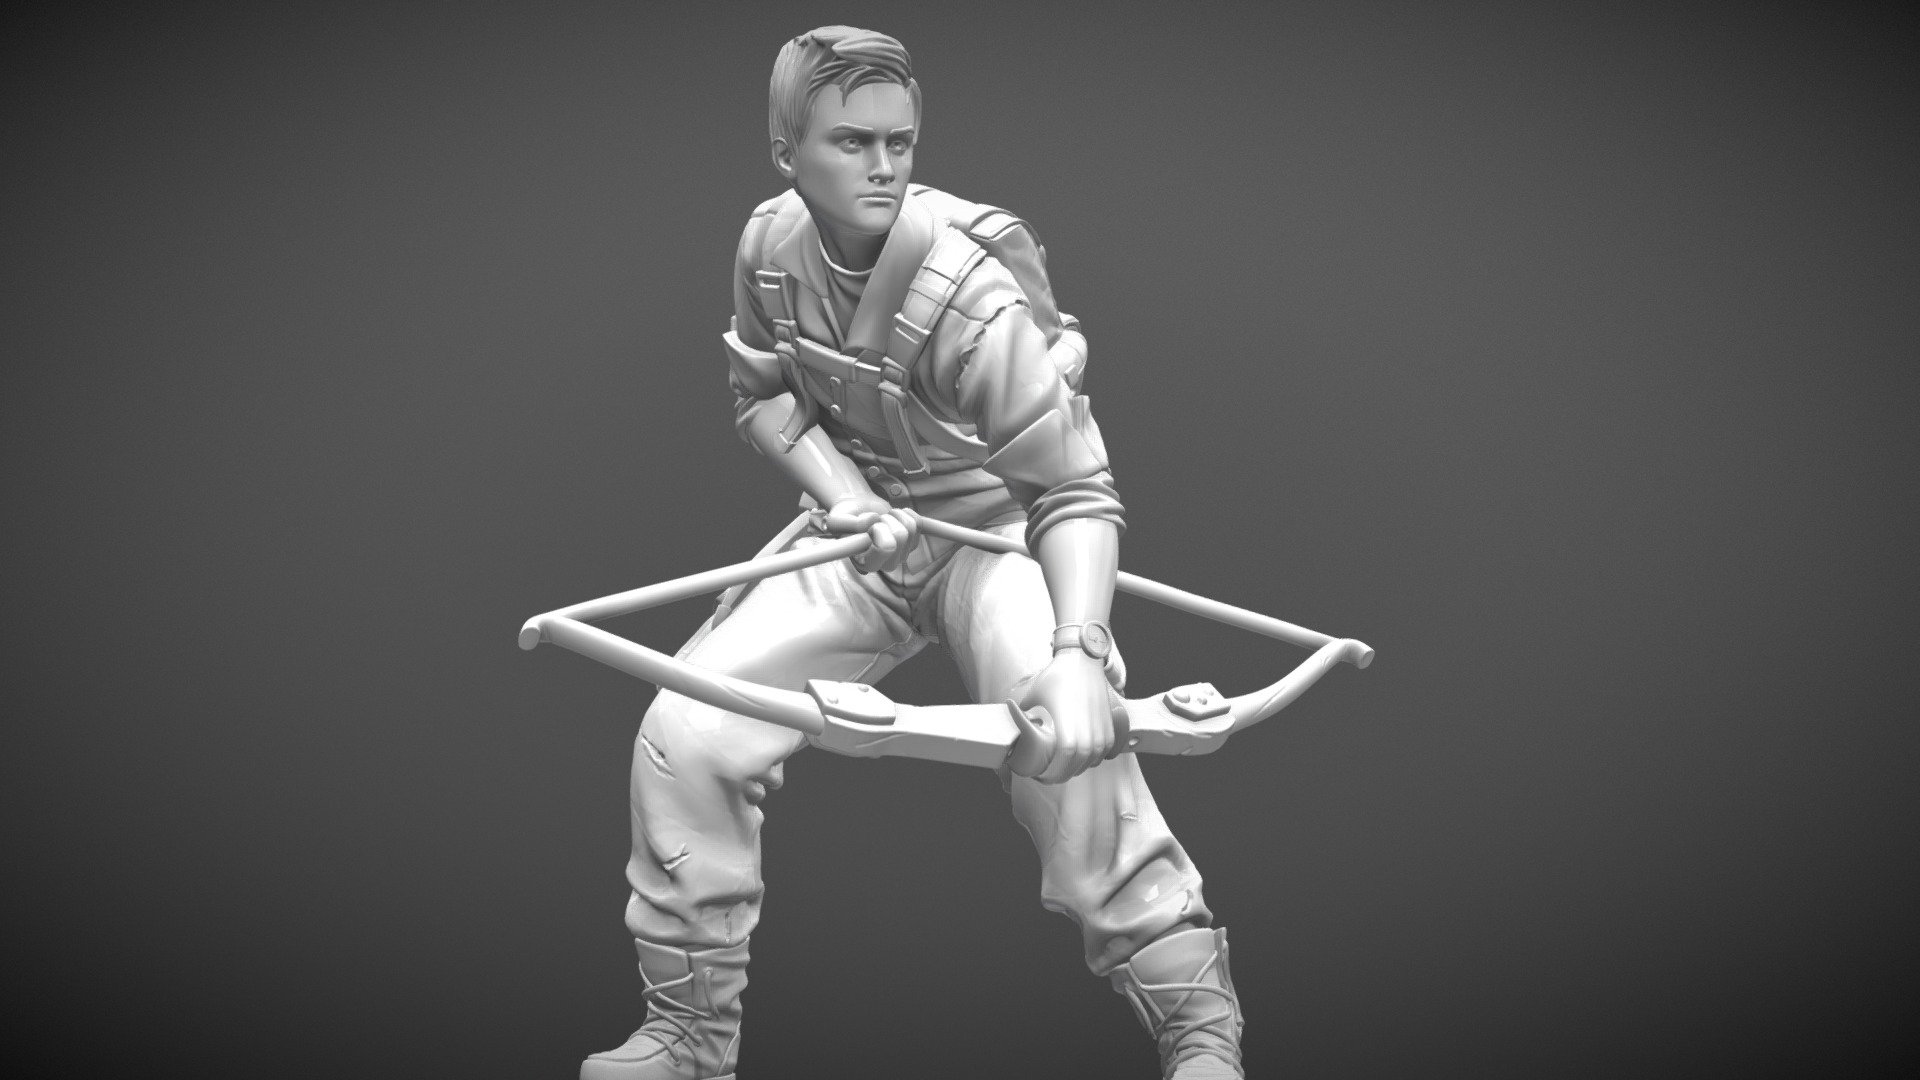 Made for a clients board game 3d model